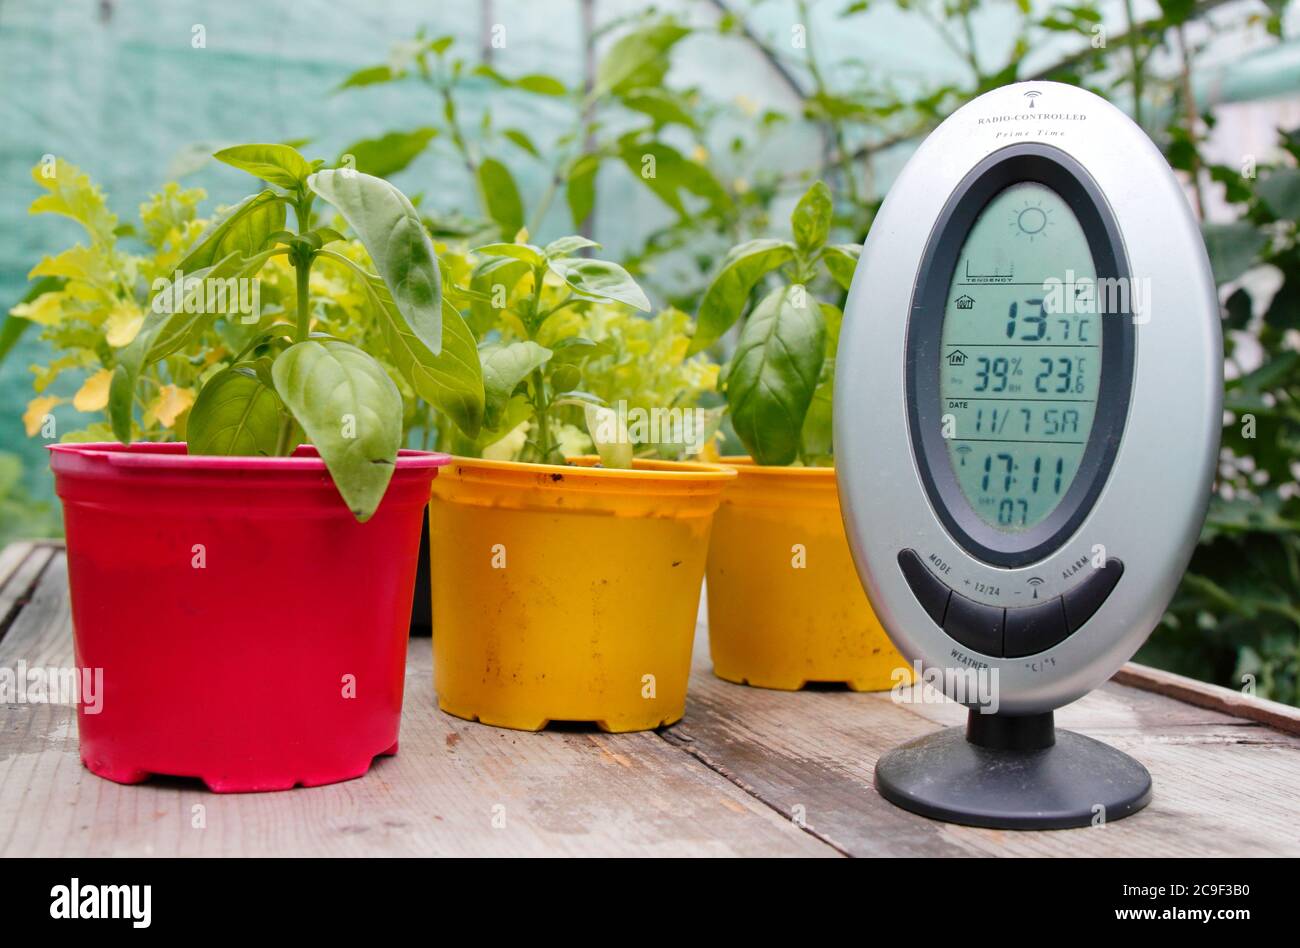 Monitoring the temperature and humidity in a domestic greenhouse. UK Stock Photo